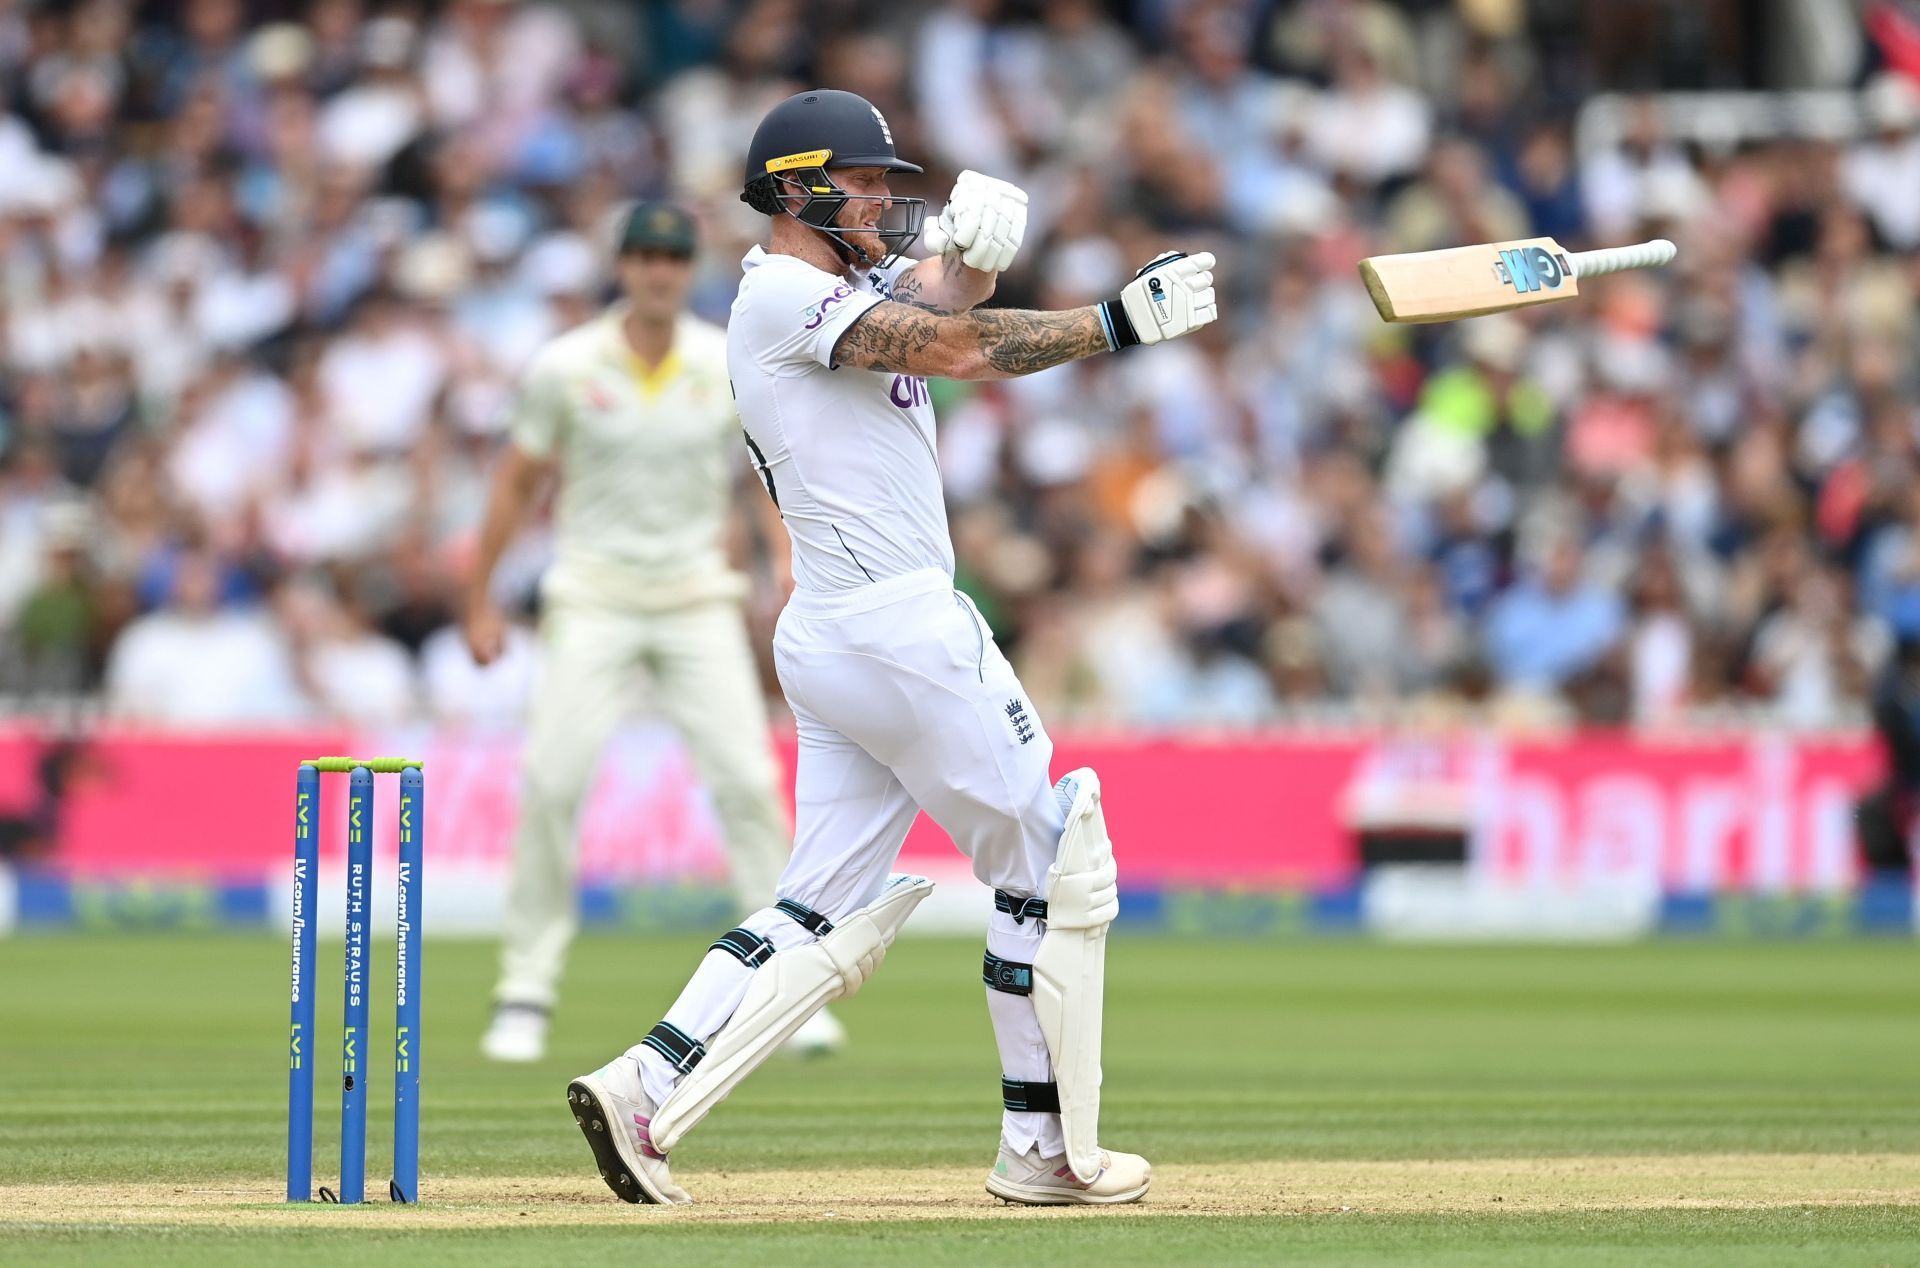 Ben Stokes clobbered 155 in a losing cause at Lord&rsquo;s. (Pic: Getty Images)